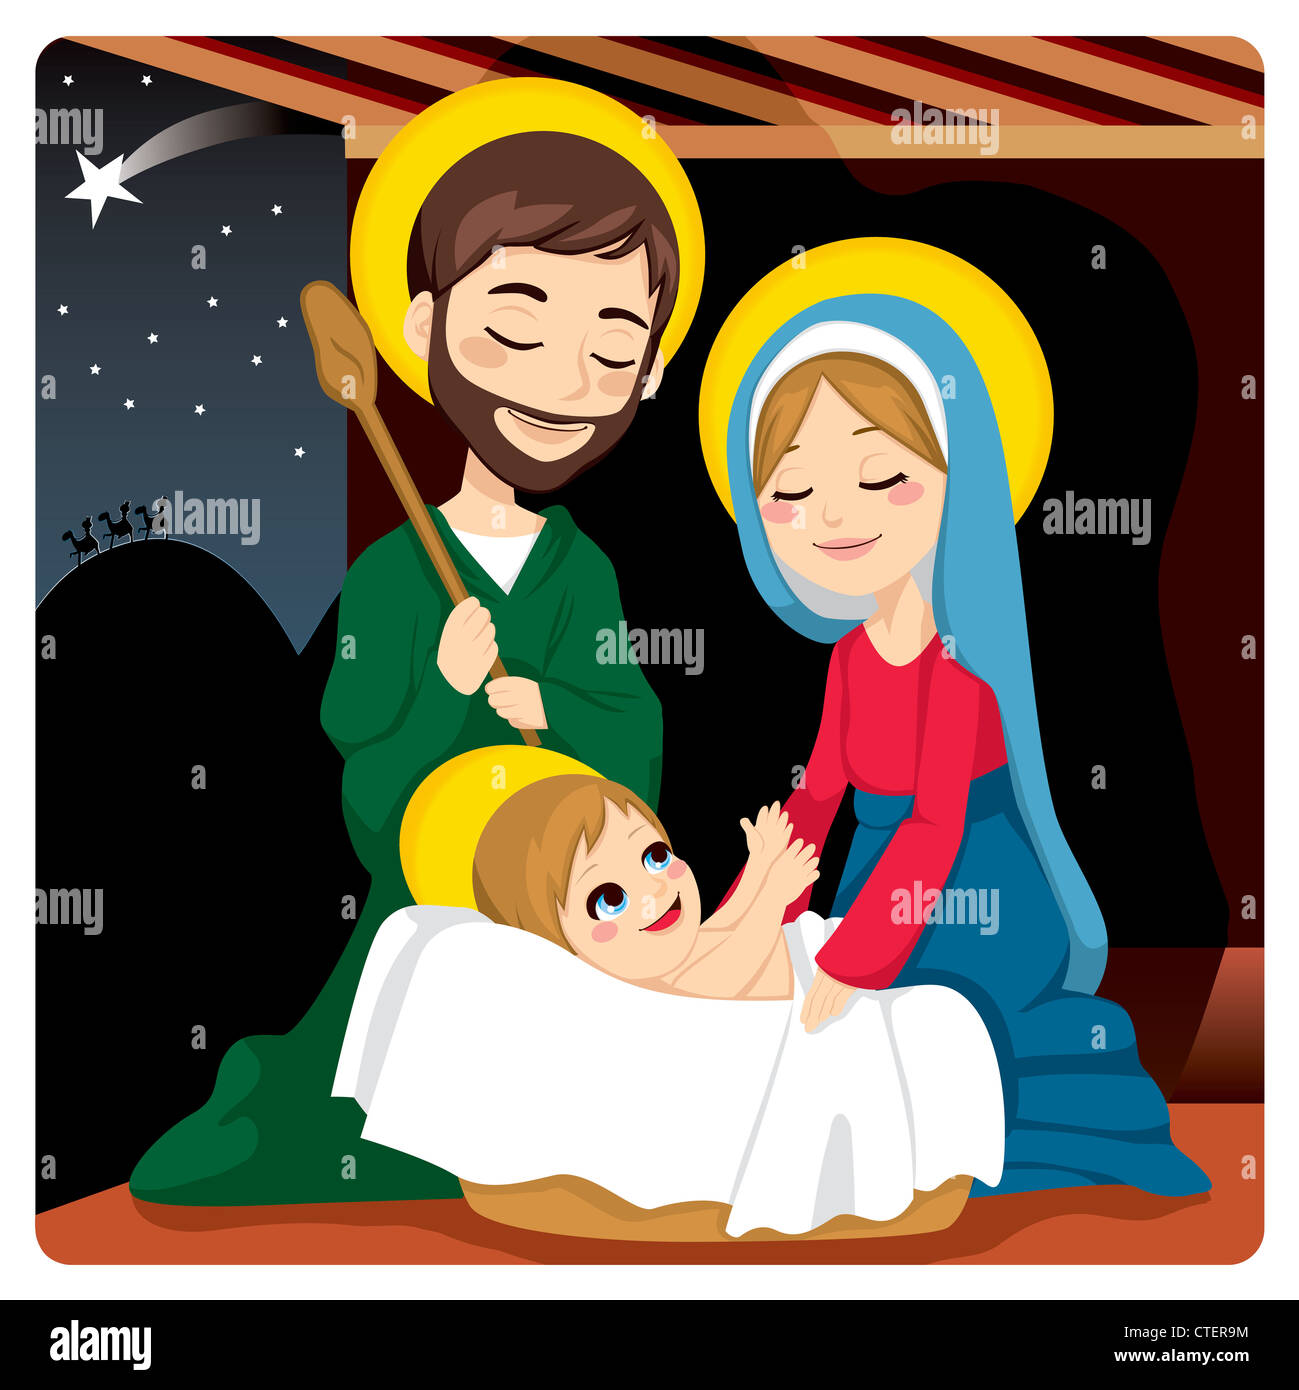 Joseph and Mary joyful with baby Jesus laughing and three wise kings on the horizon following the Star of Bethlehem Stock Photo